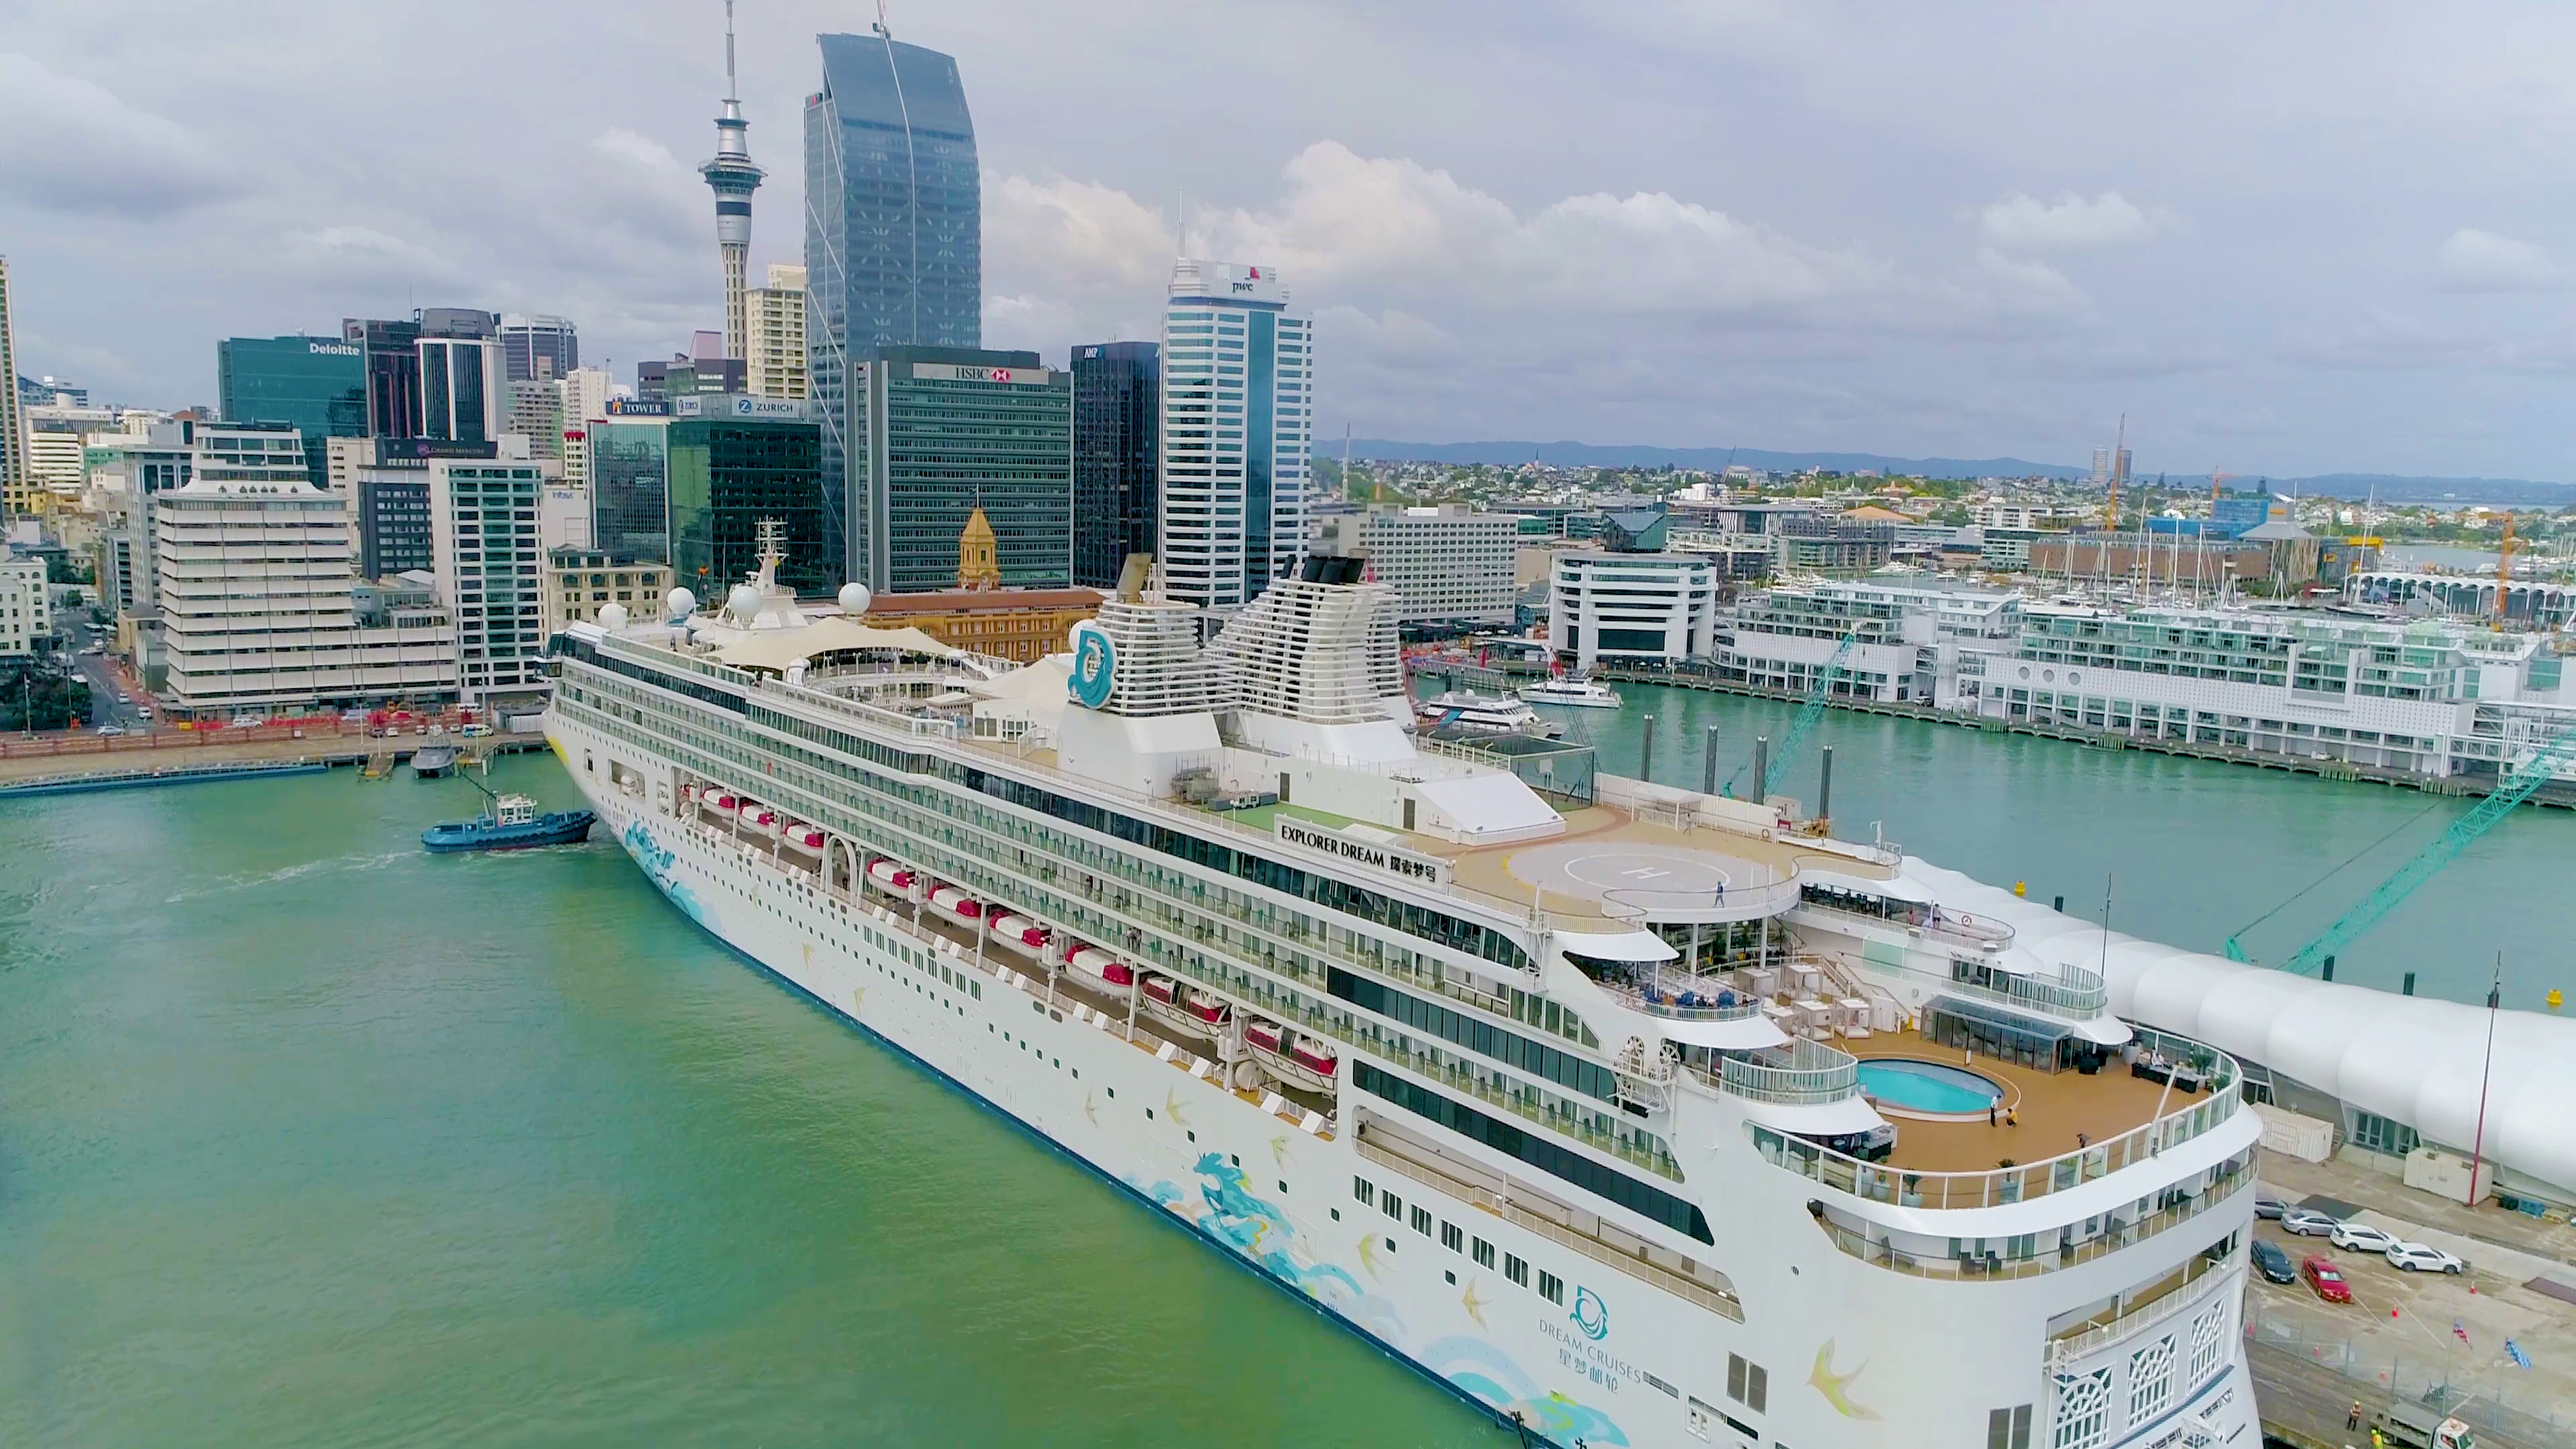 Dream Cruises sails beyond Asia, celebrating the maiden arrival of